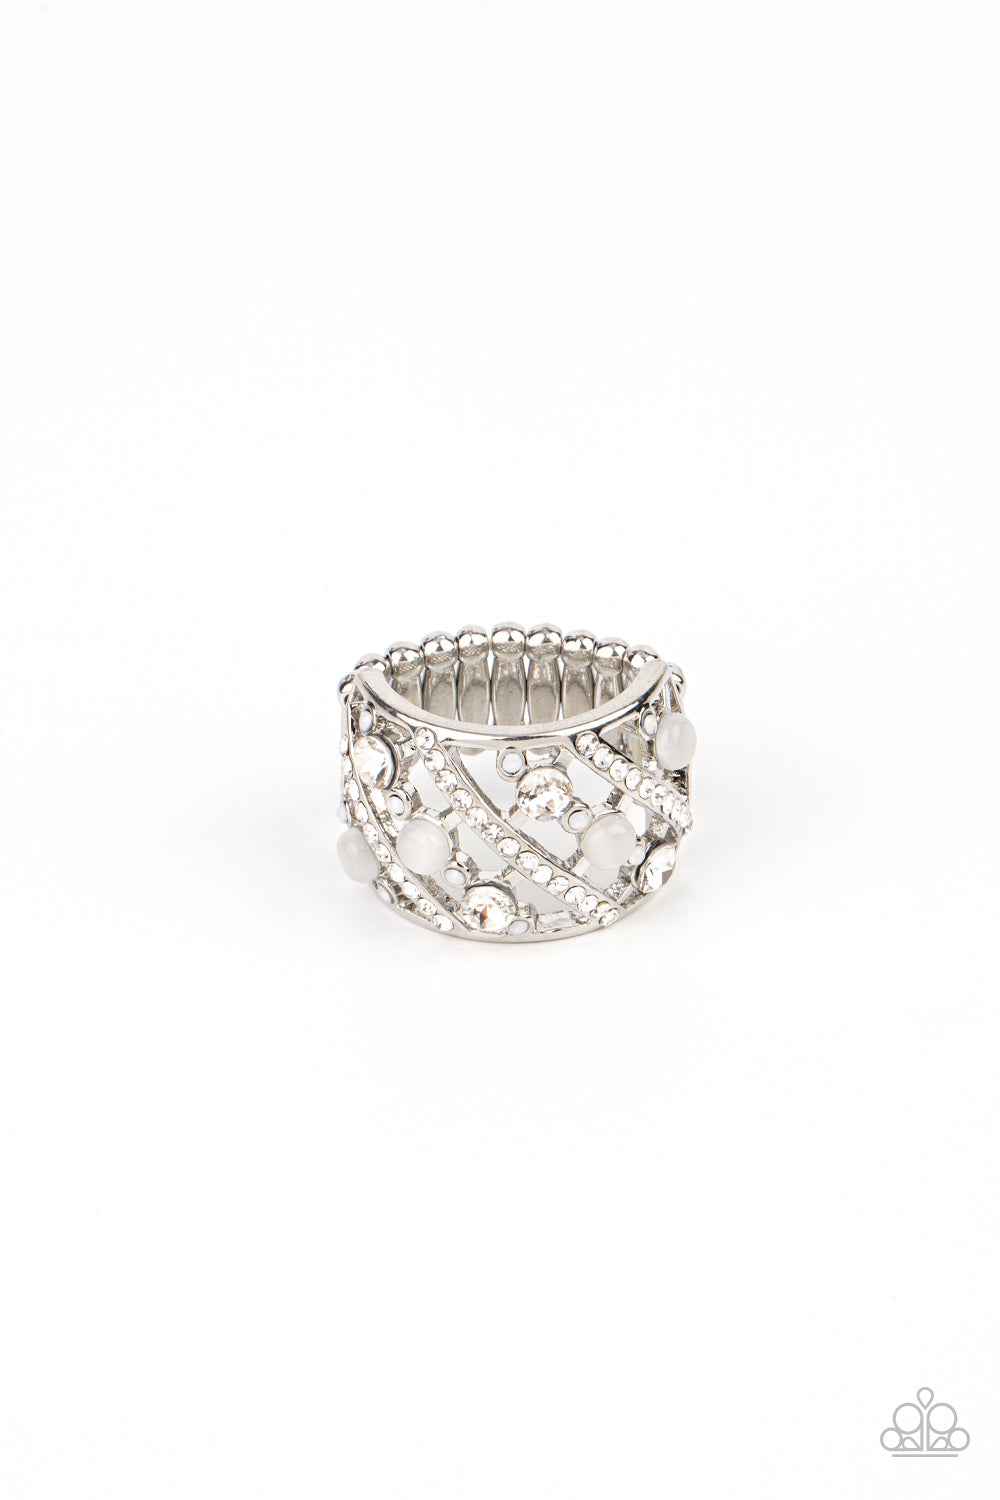 Bubbles for Brunch - white - Paparazzi ring